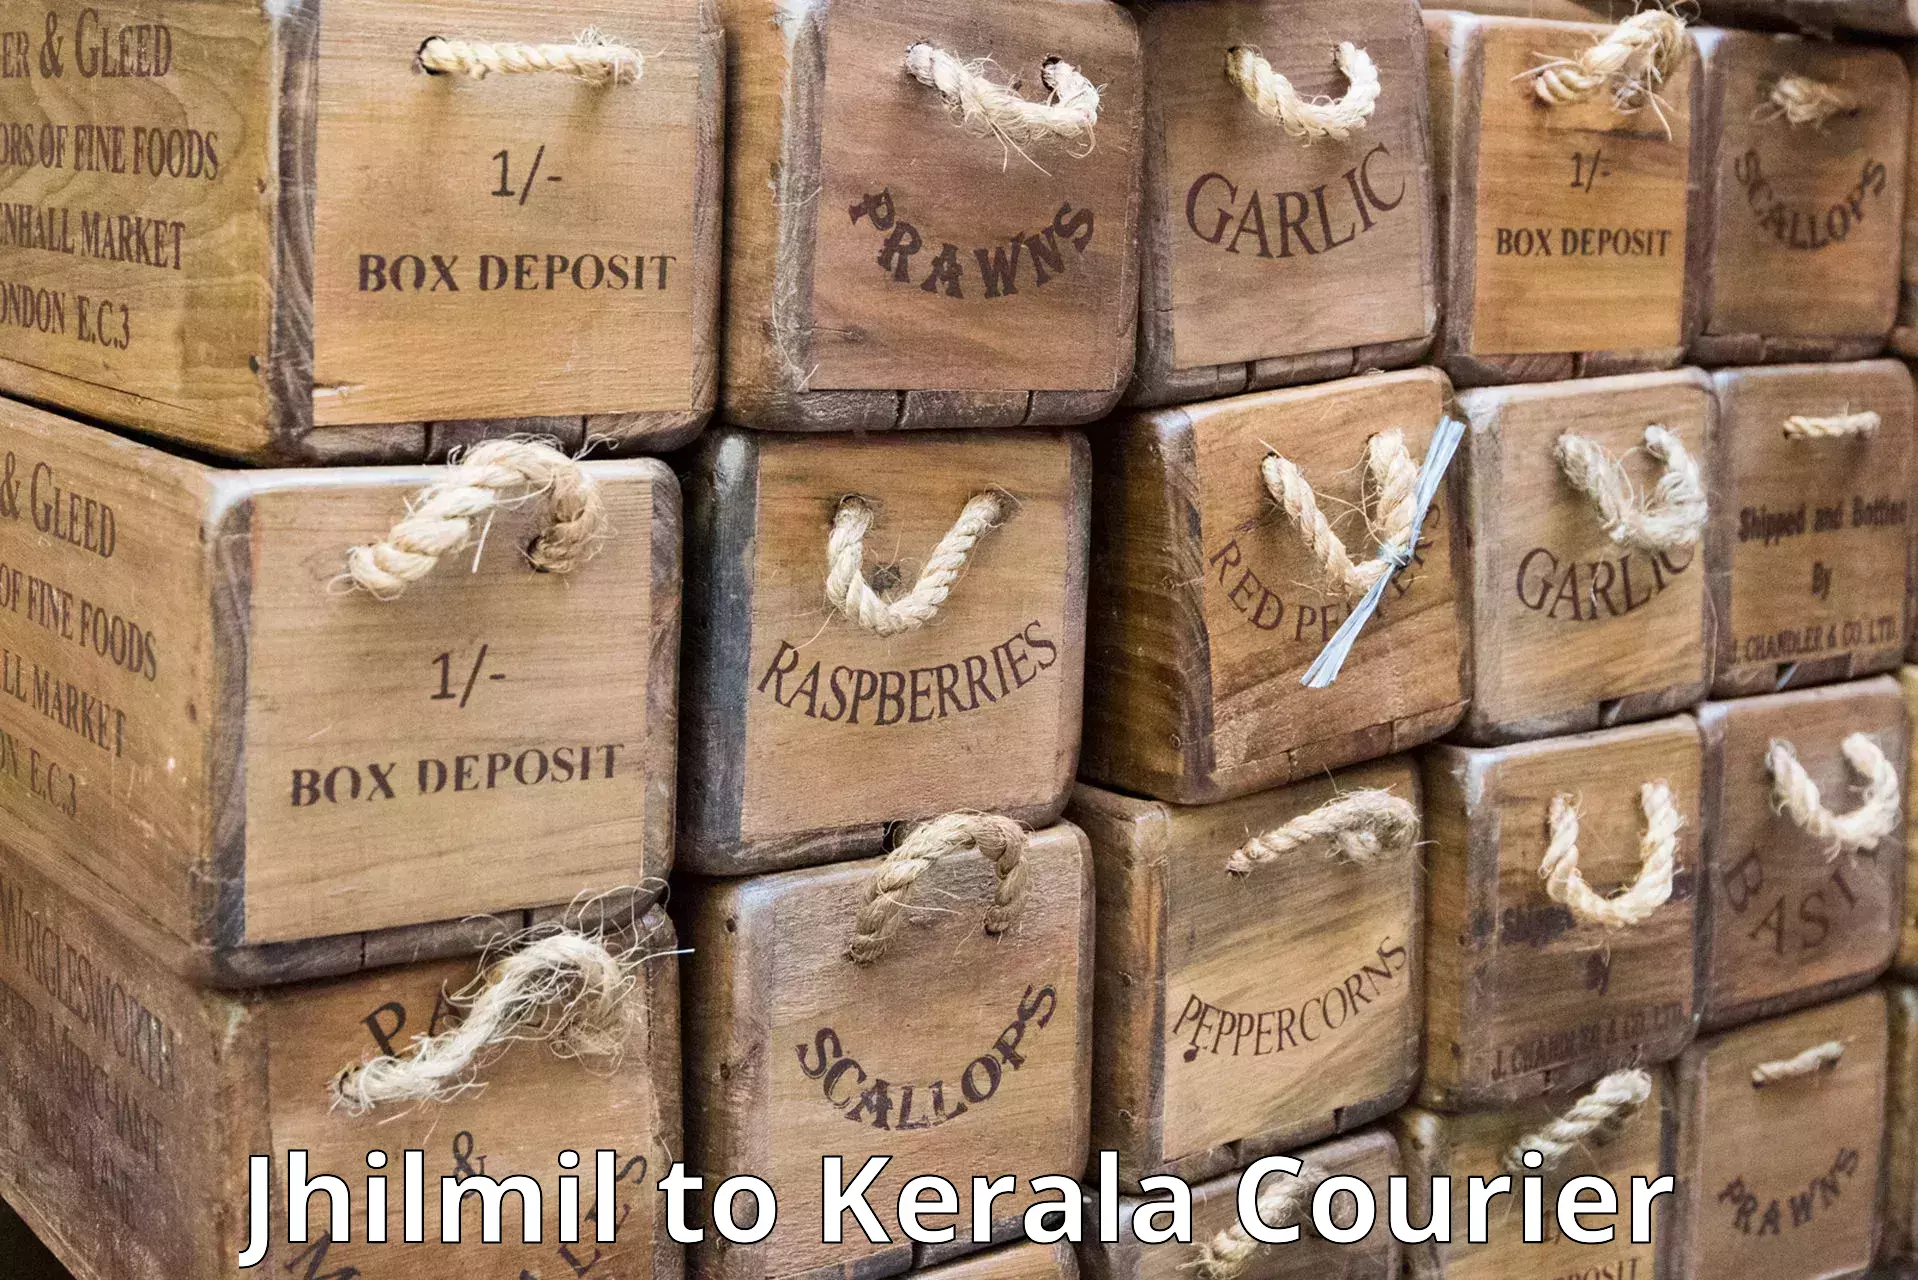 Express package handling Jhilmil to Pathanamthitta